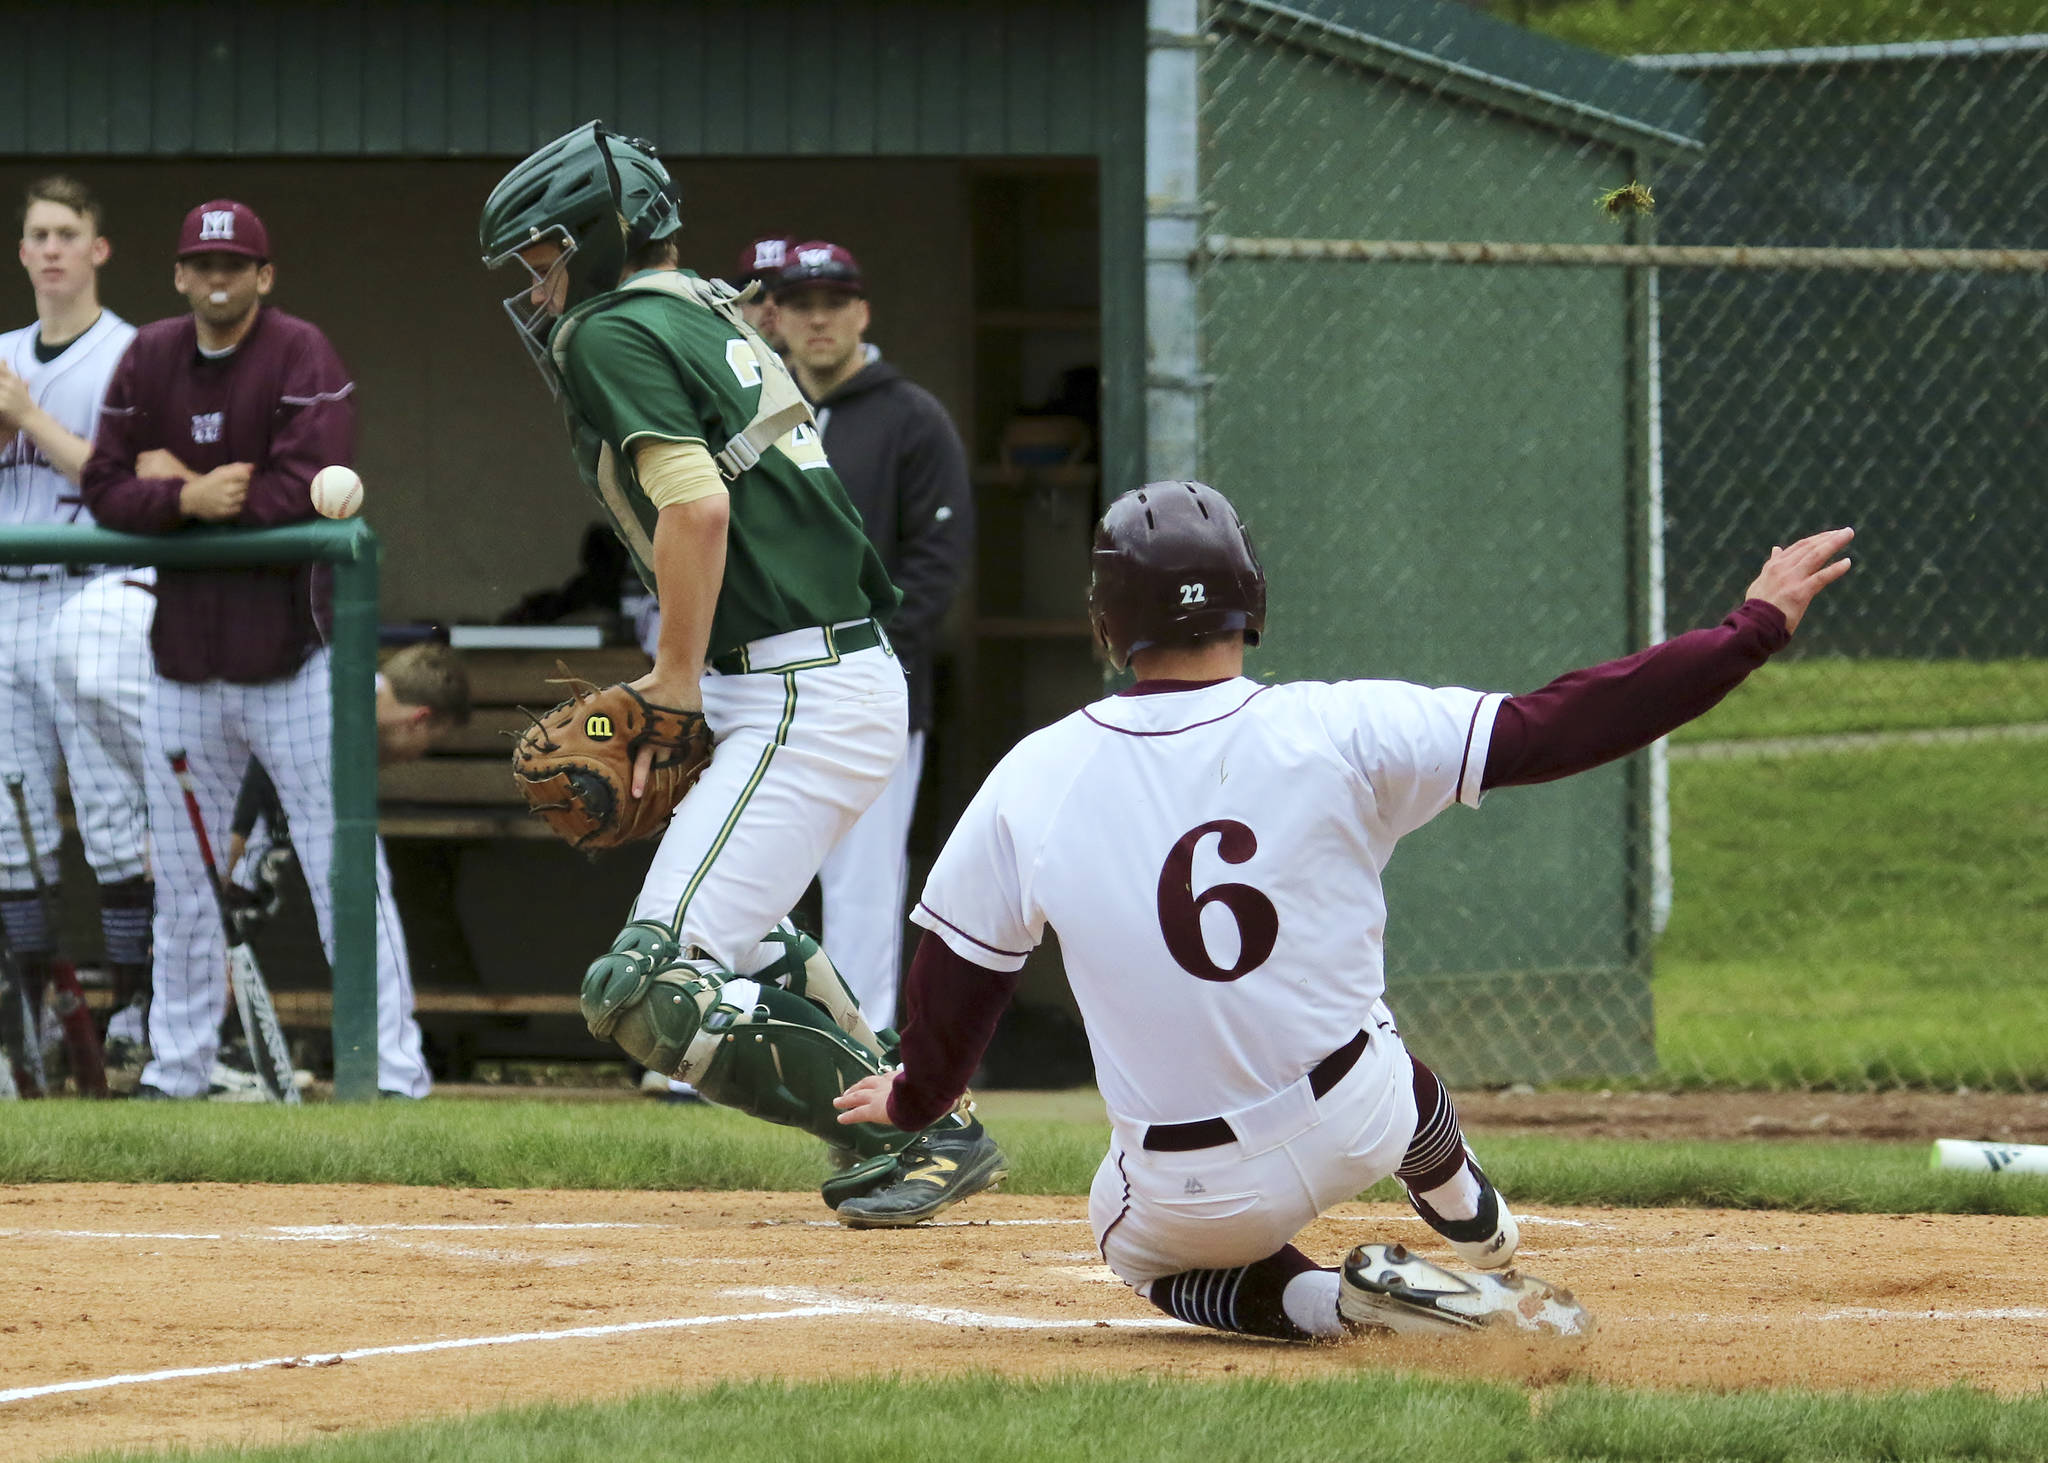 Photo courtesy of Jim Nicholson                                Mercer Island player Greg Fuchs scores the first run of the game for the Islanders in the bottom of the first inning. Mercer Island cruised to a 11-1 win in just five innings against the Redmond Mustangs on April 26 at Courter Field at Bellevue College.